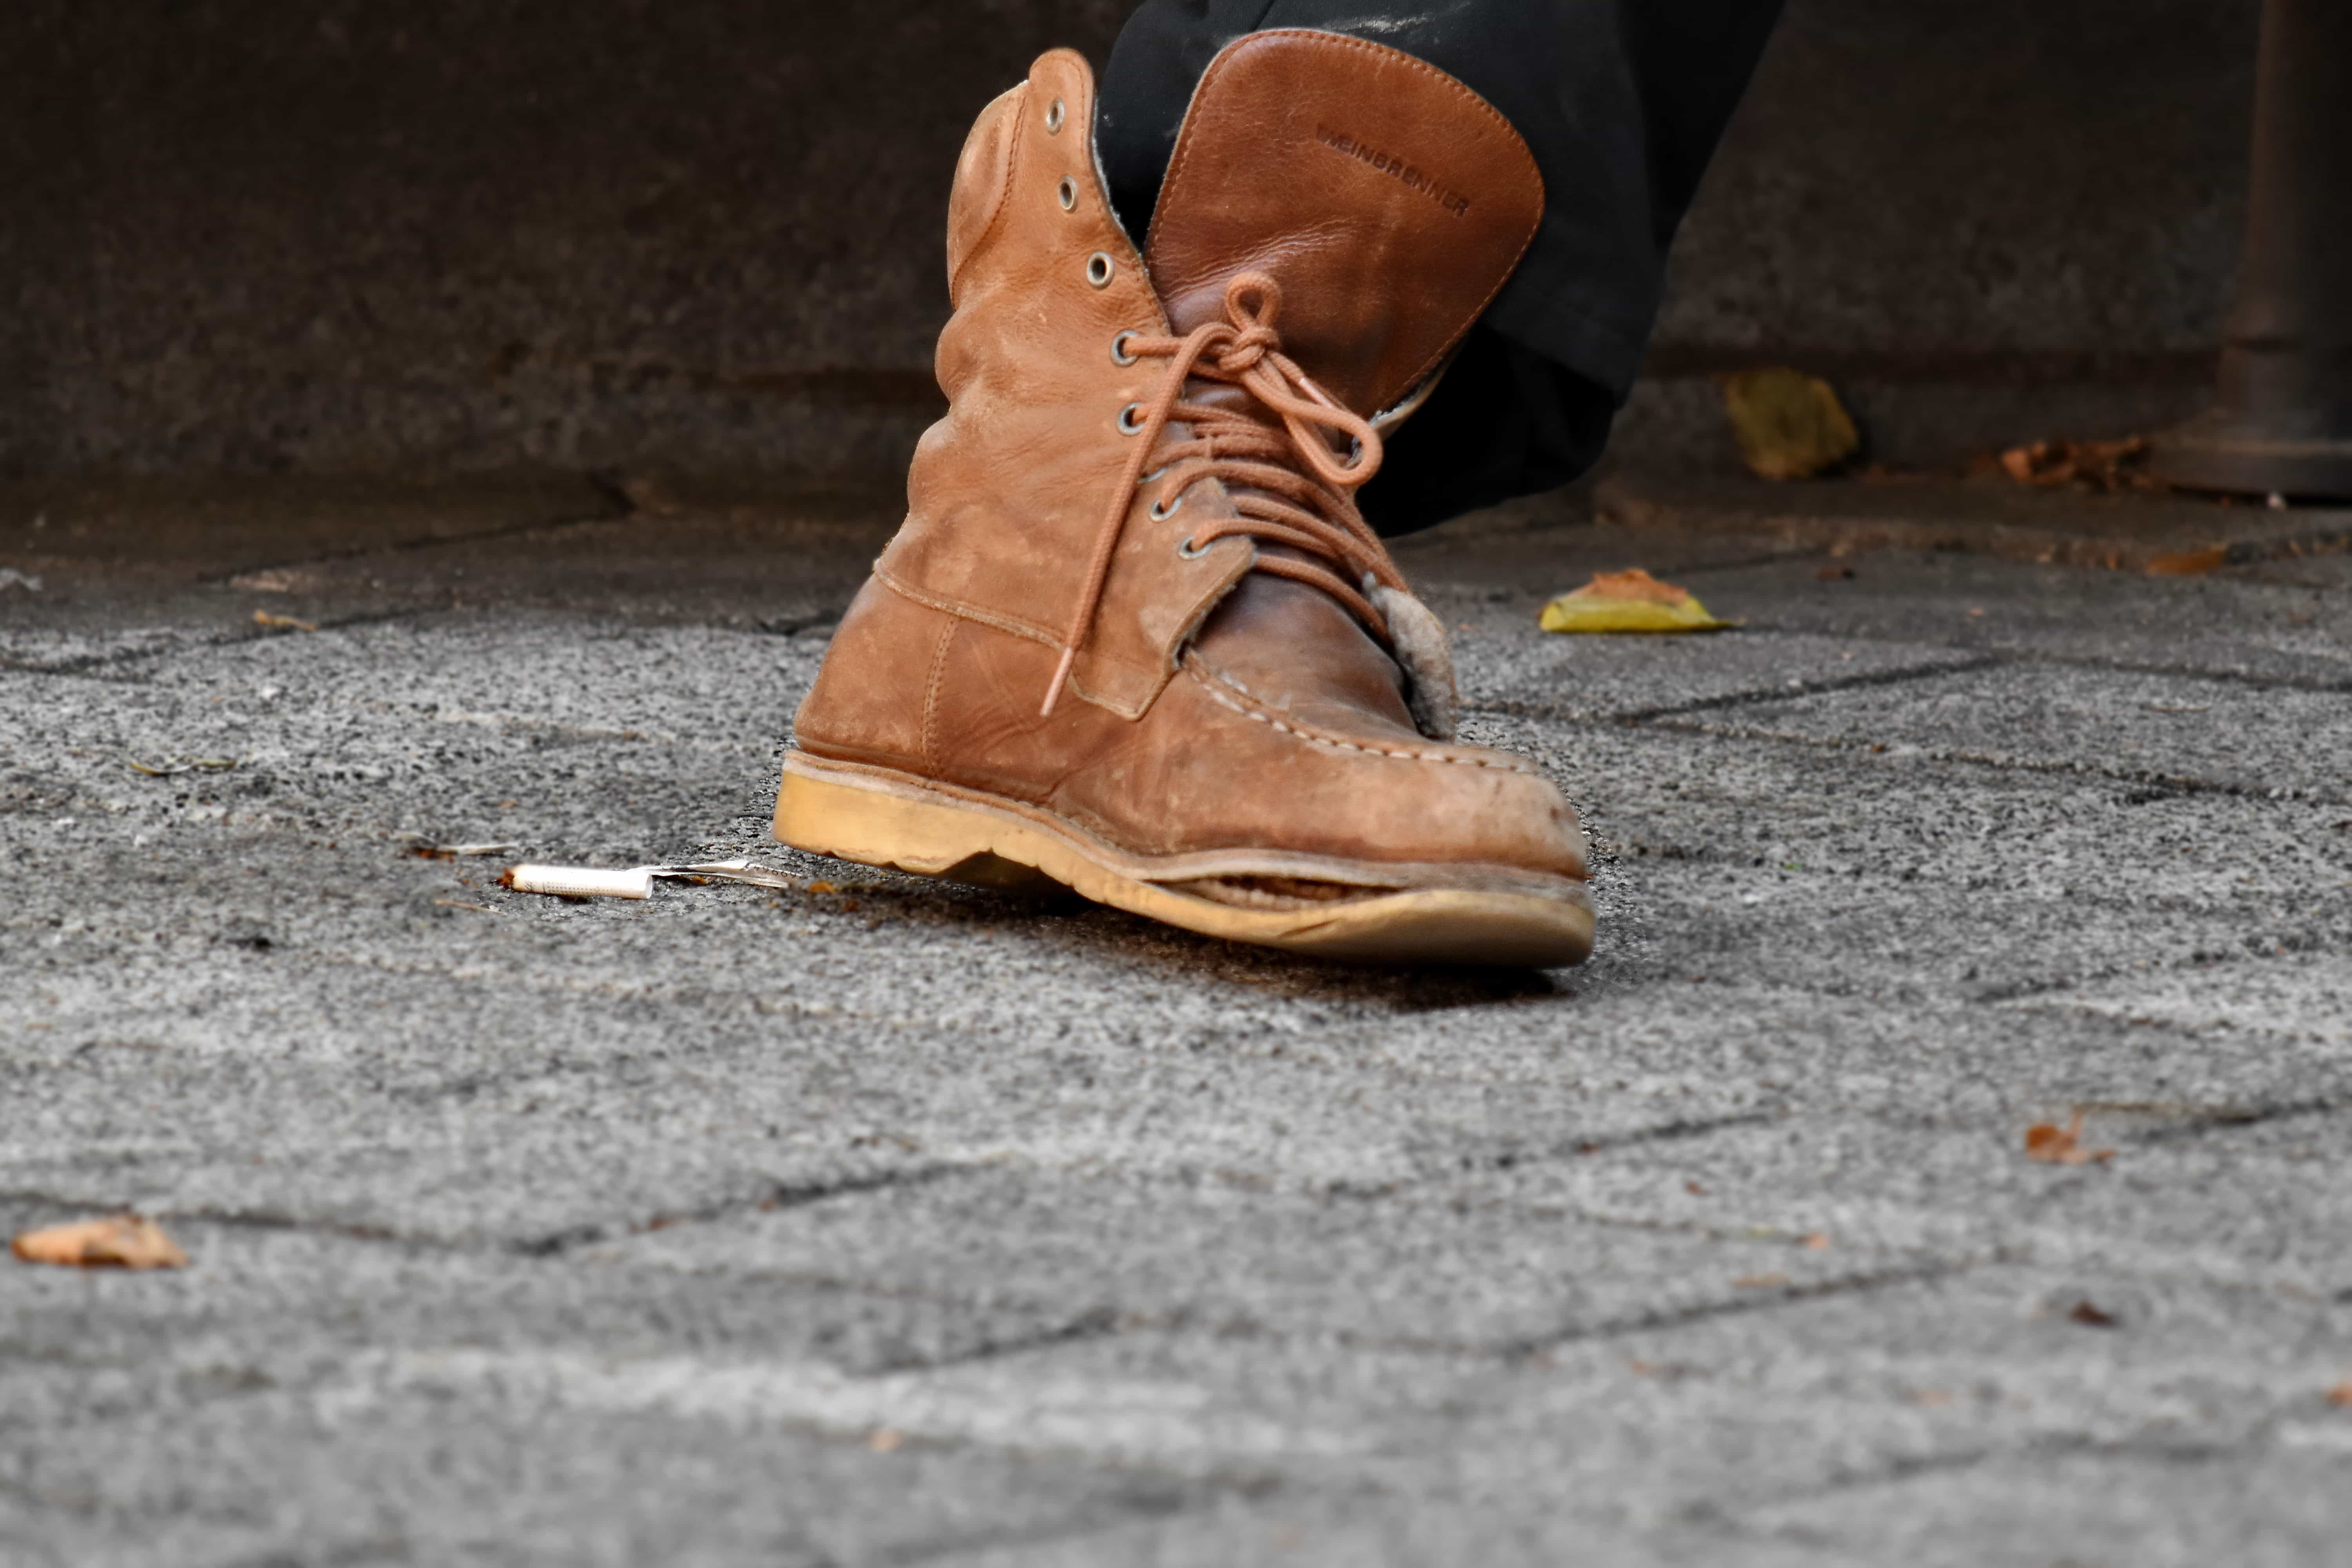 Free picture: dirty, hole, old, shoe, foot, boot, asphalt, ground ...